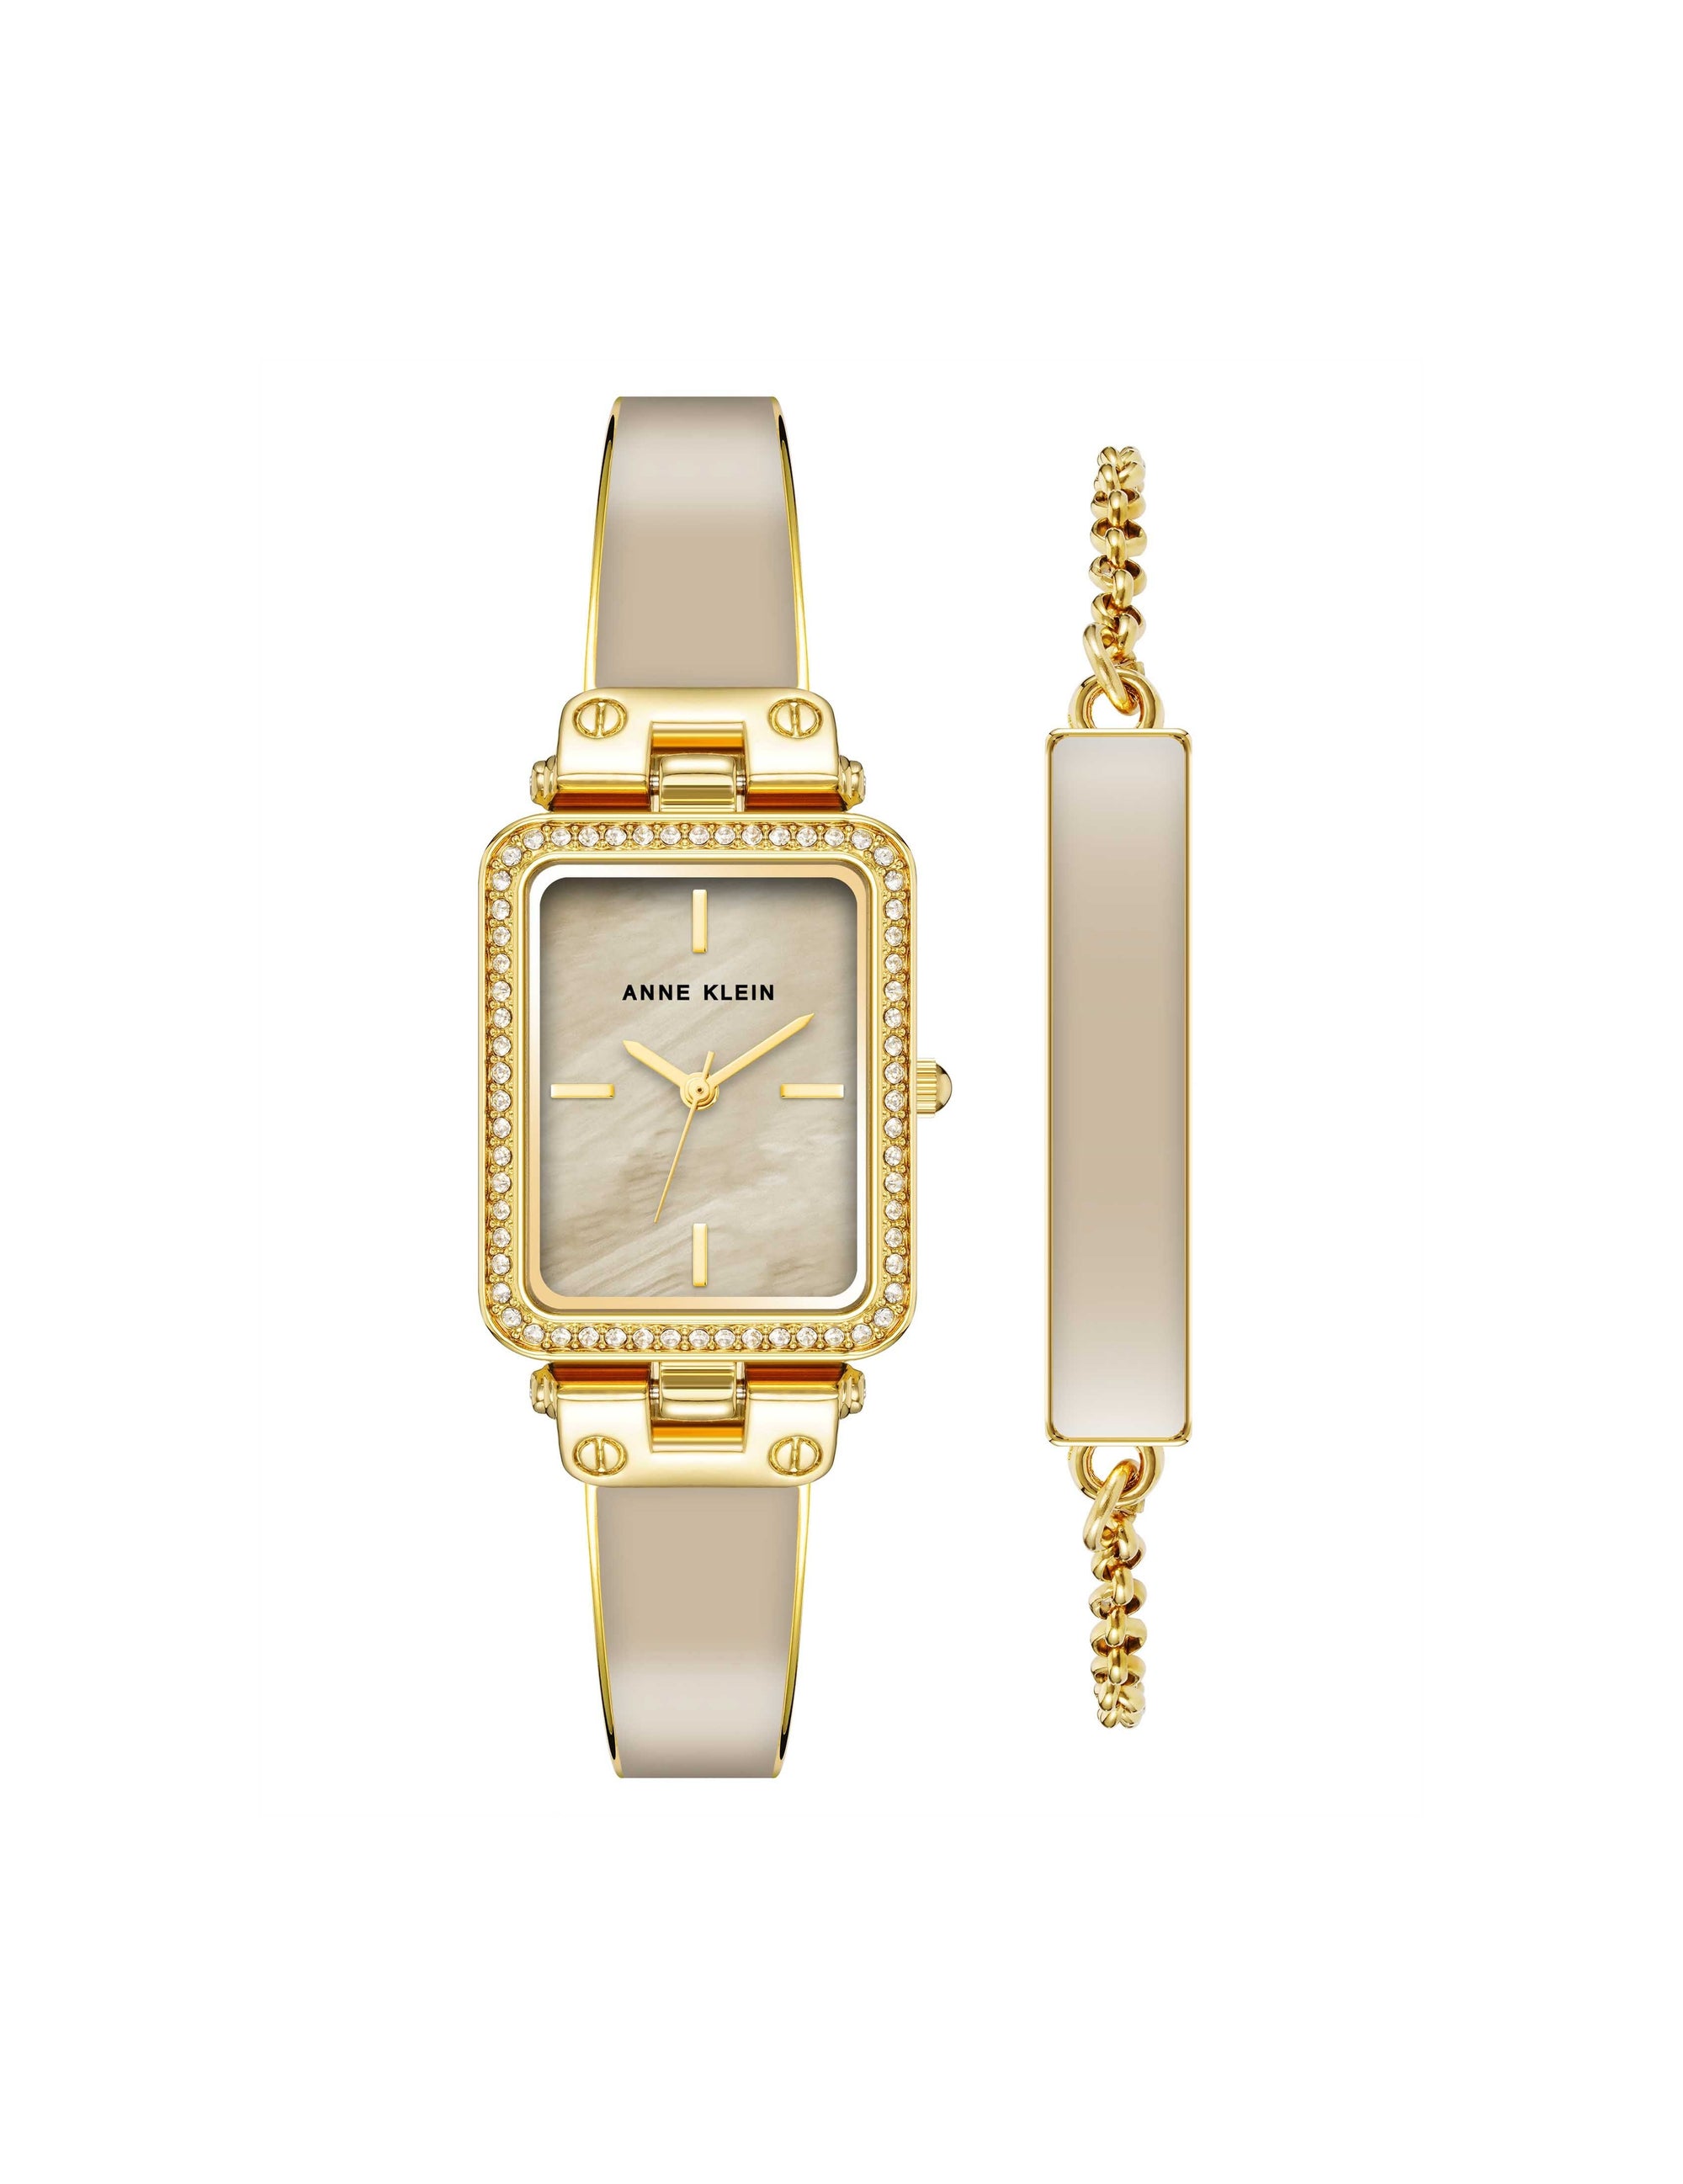 Anne Klein Watches: Shop the Latest Collection on The Helios Watch